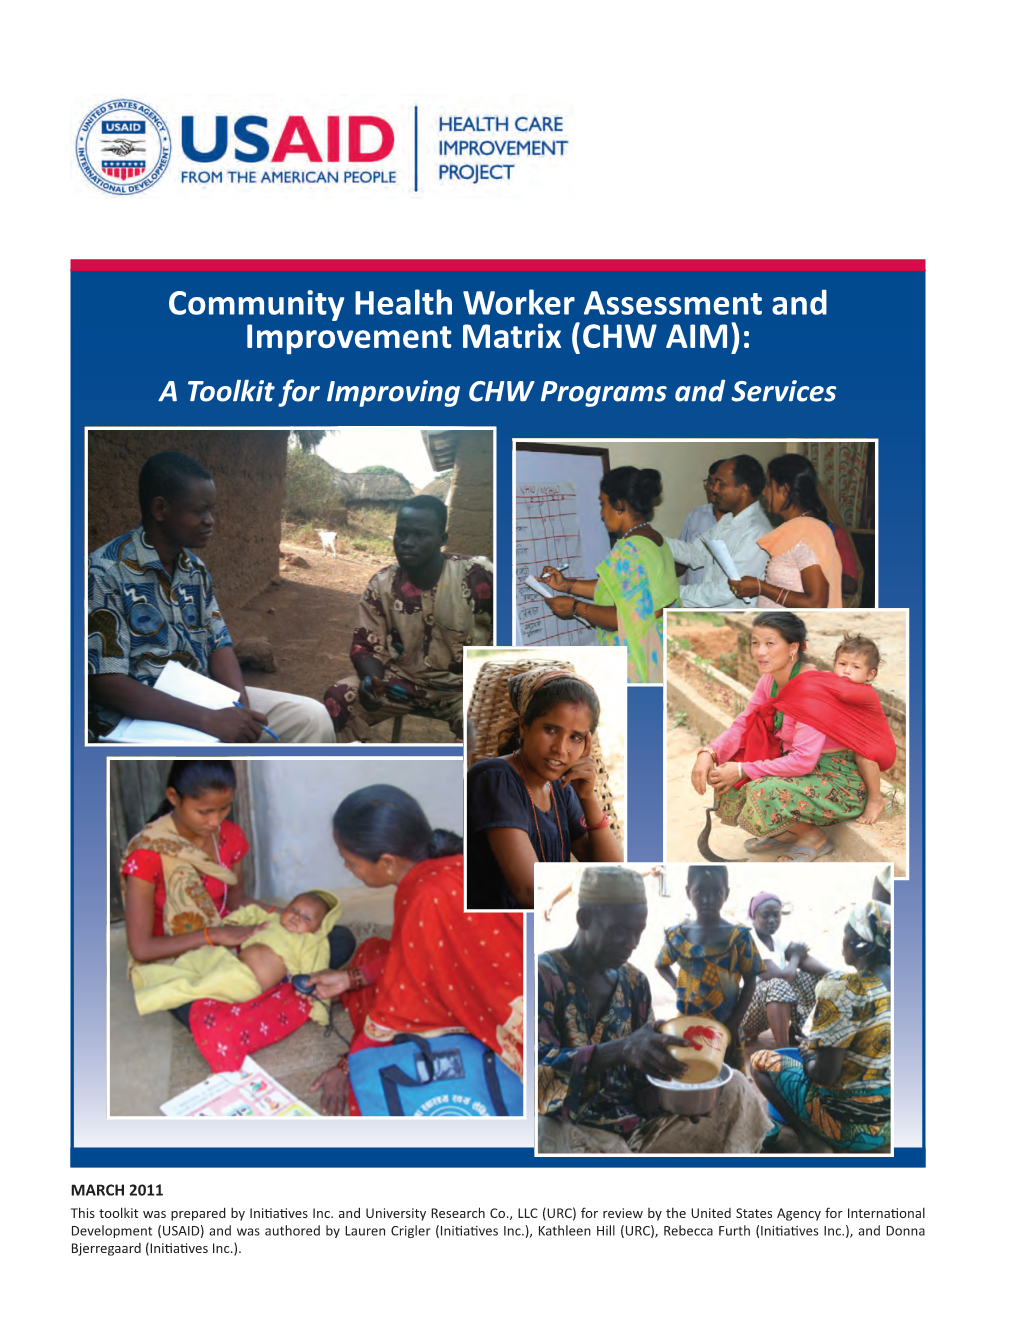 Community Health Worker Assessment and Improvement Matrix (CHW AIM): a Toolkit for Improving CHW Programs and Services